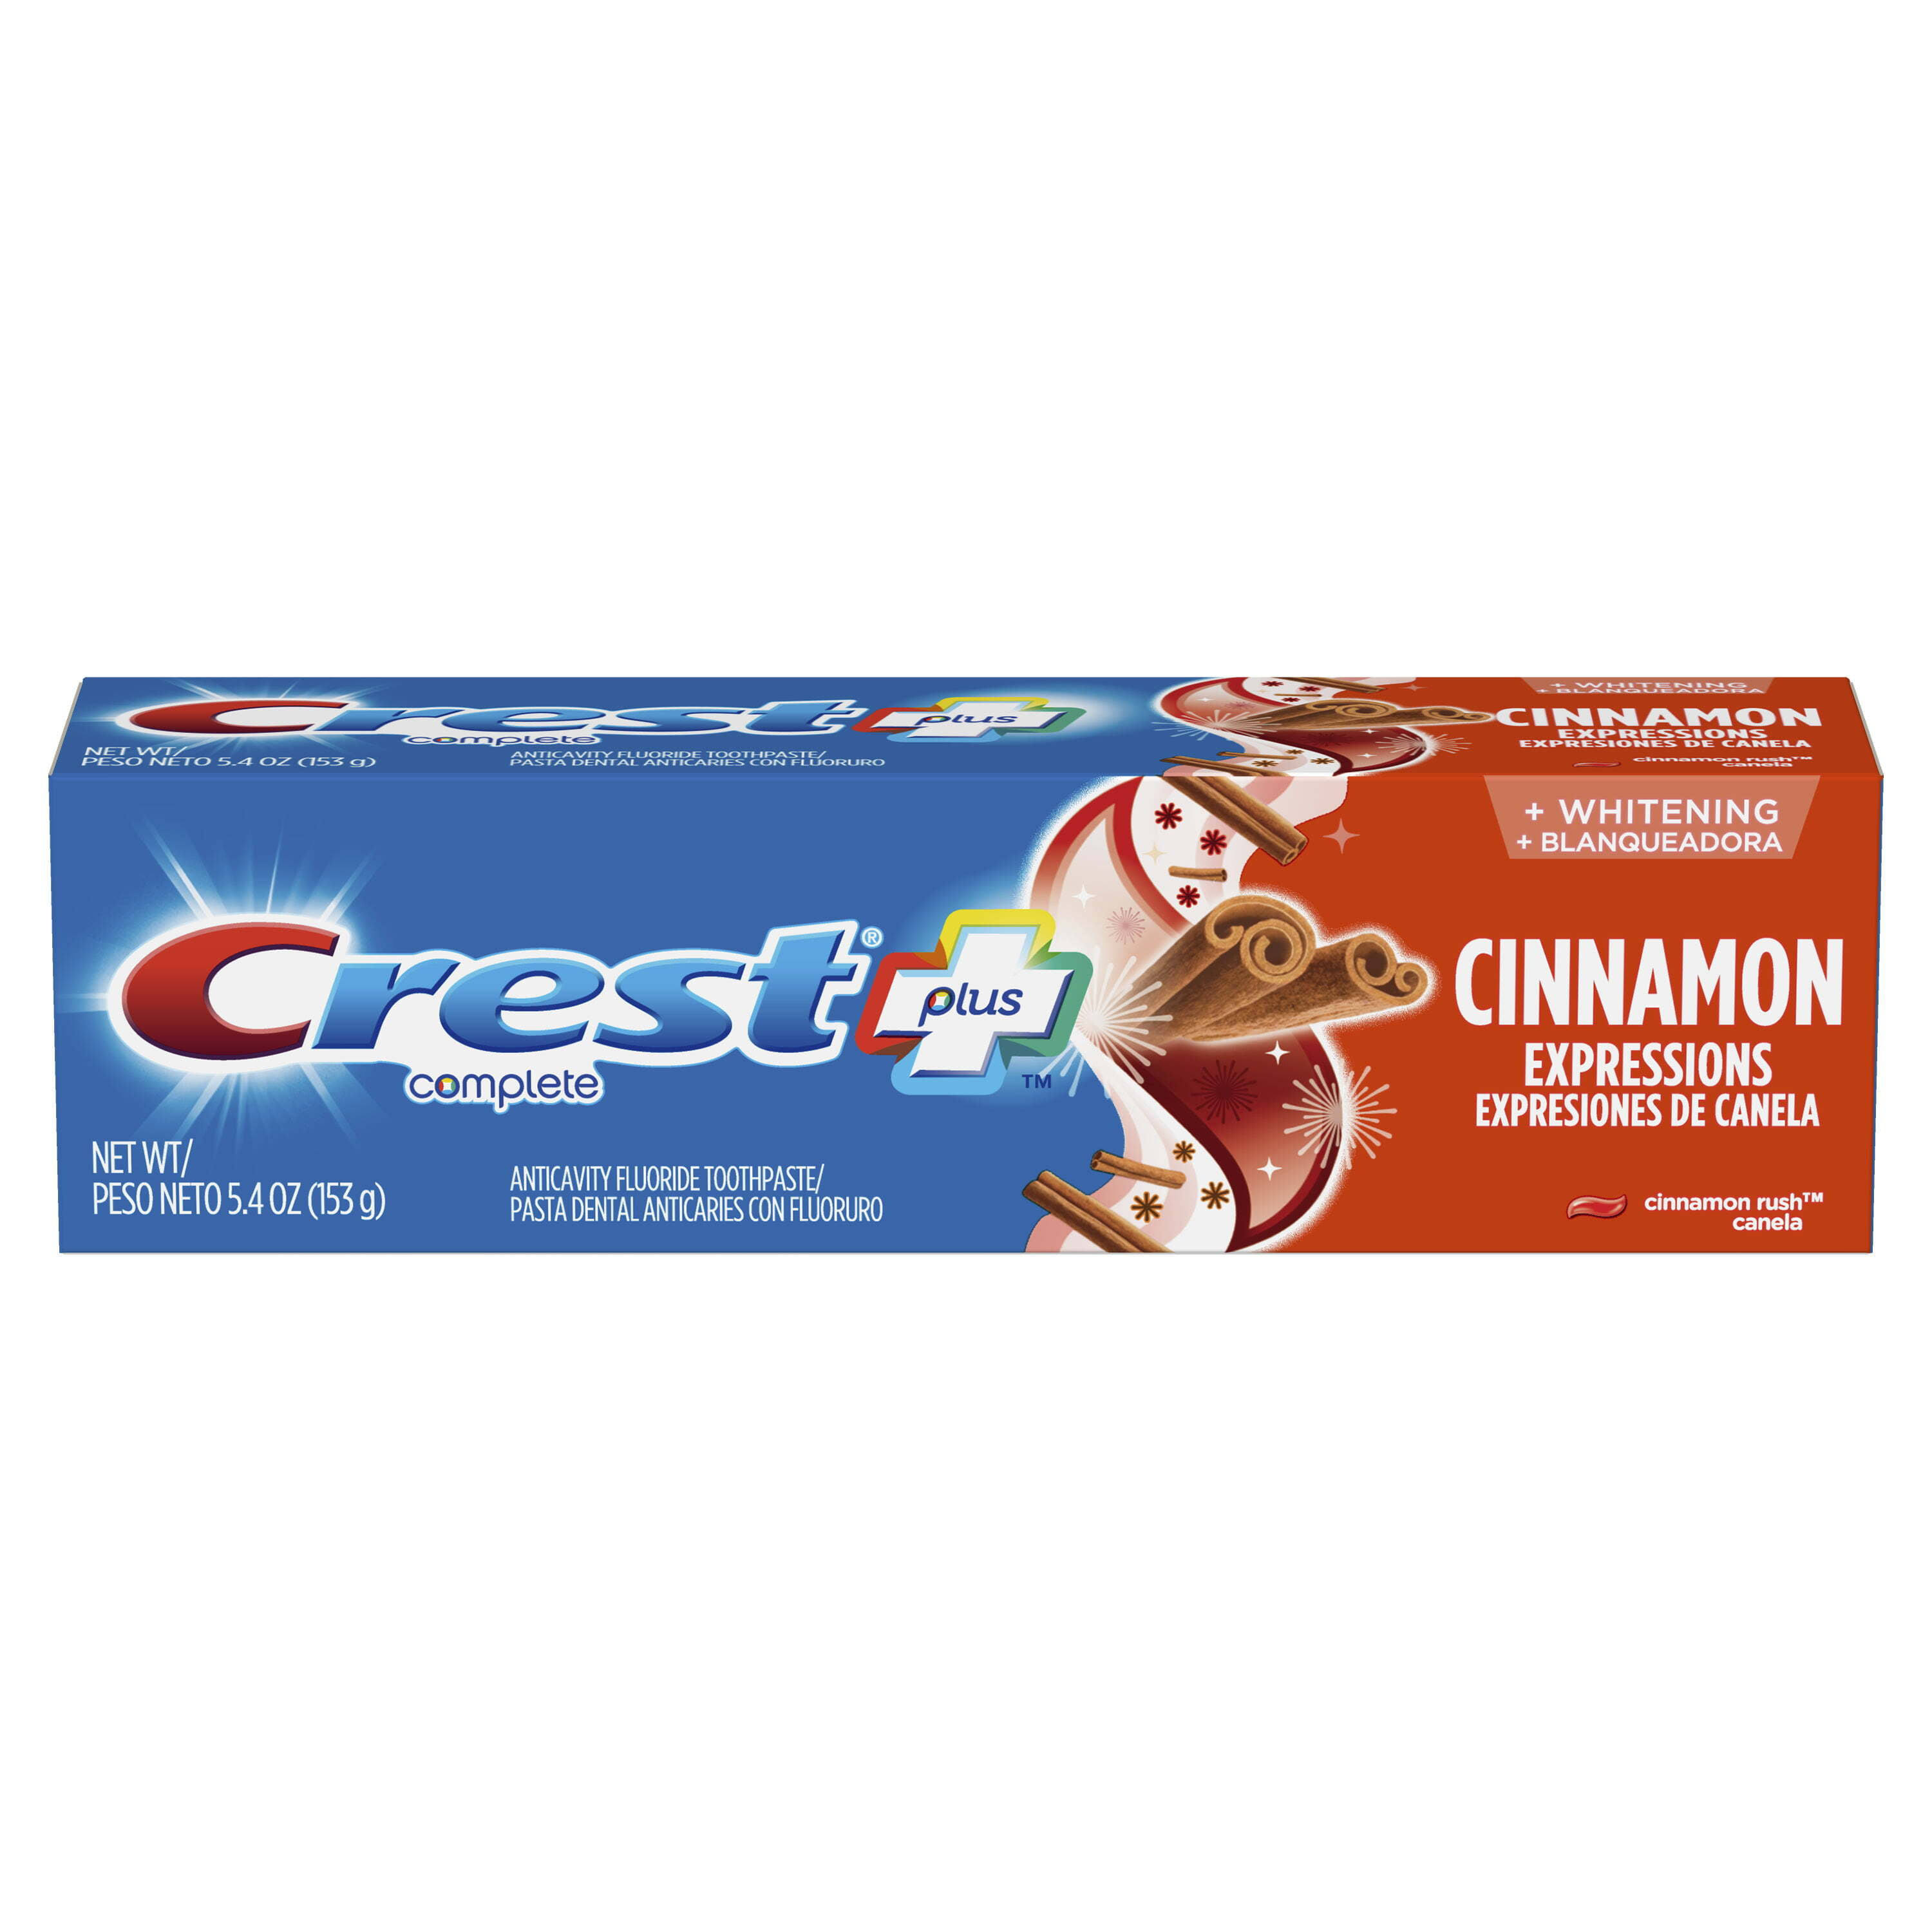 Crest complete plus cinnamon expressions toothpaste, 5.4 oz